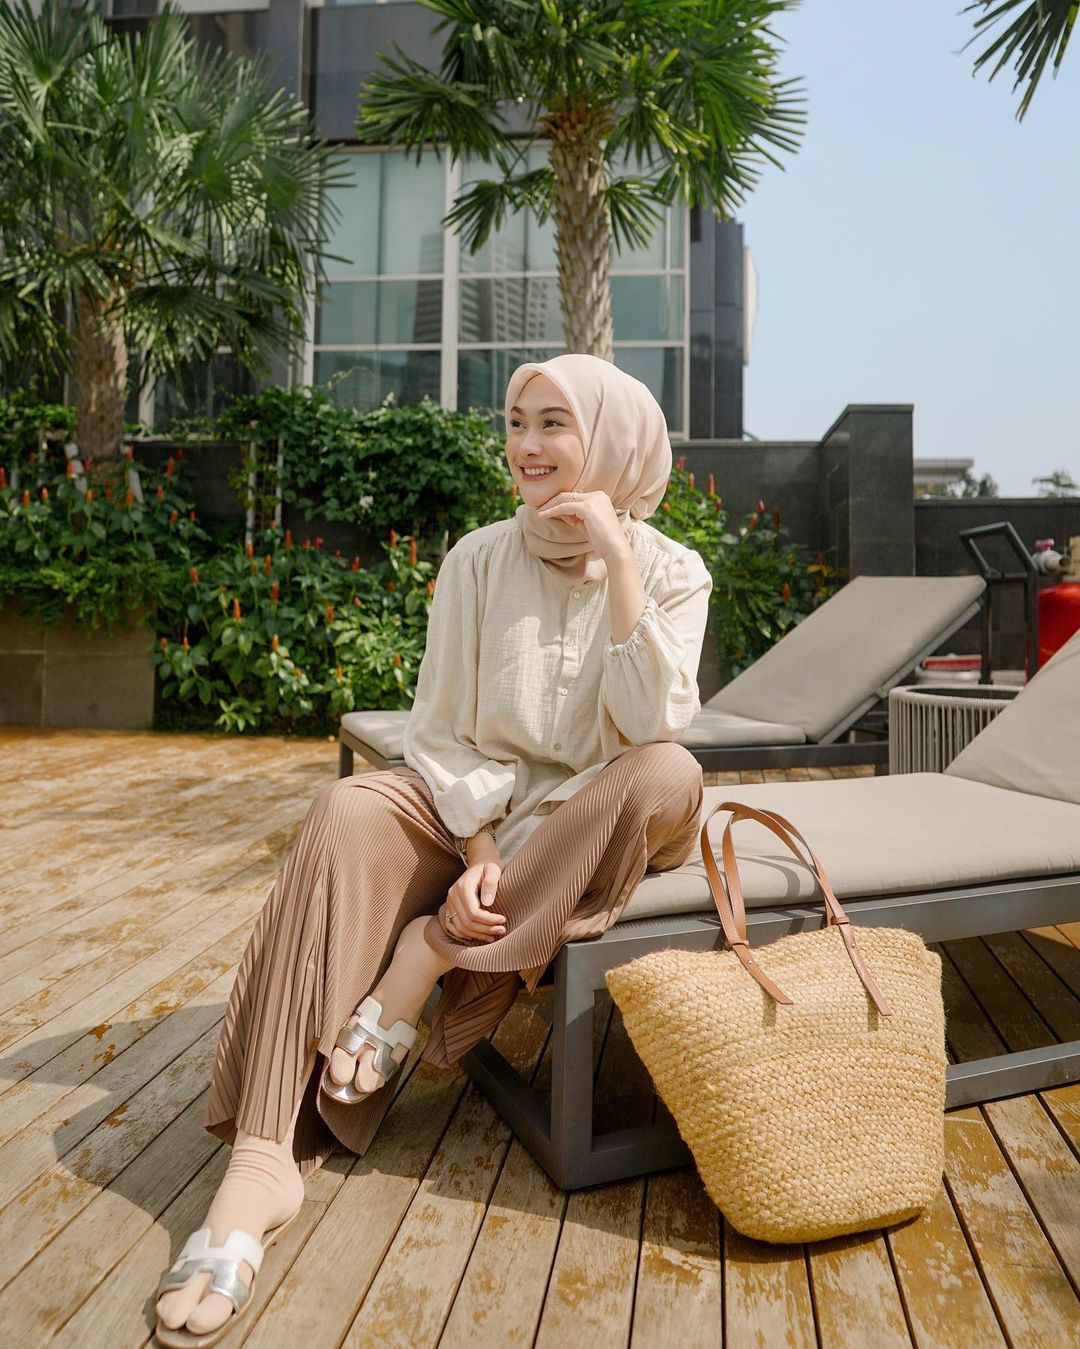 Hijab Vacation Outfit Ideas If You’re Only Wear Basic